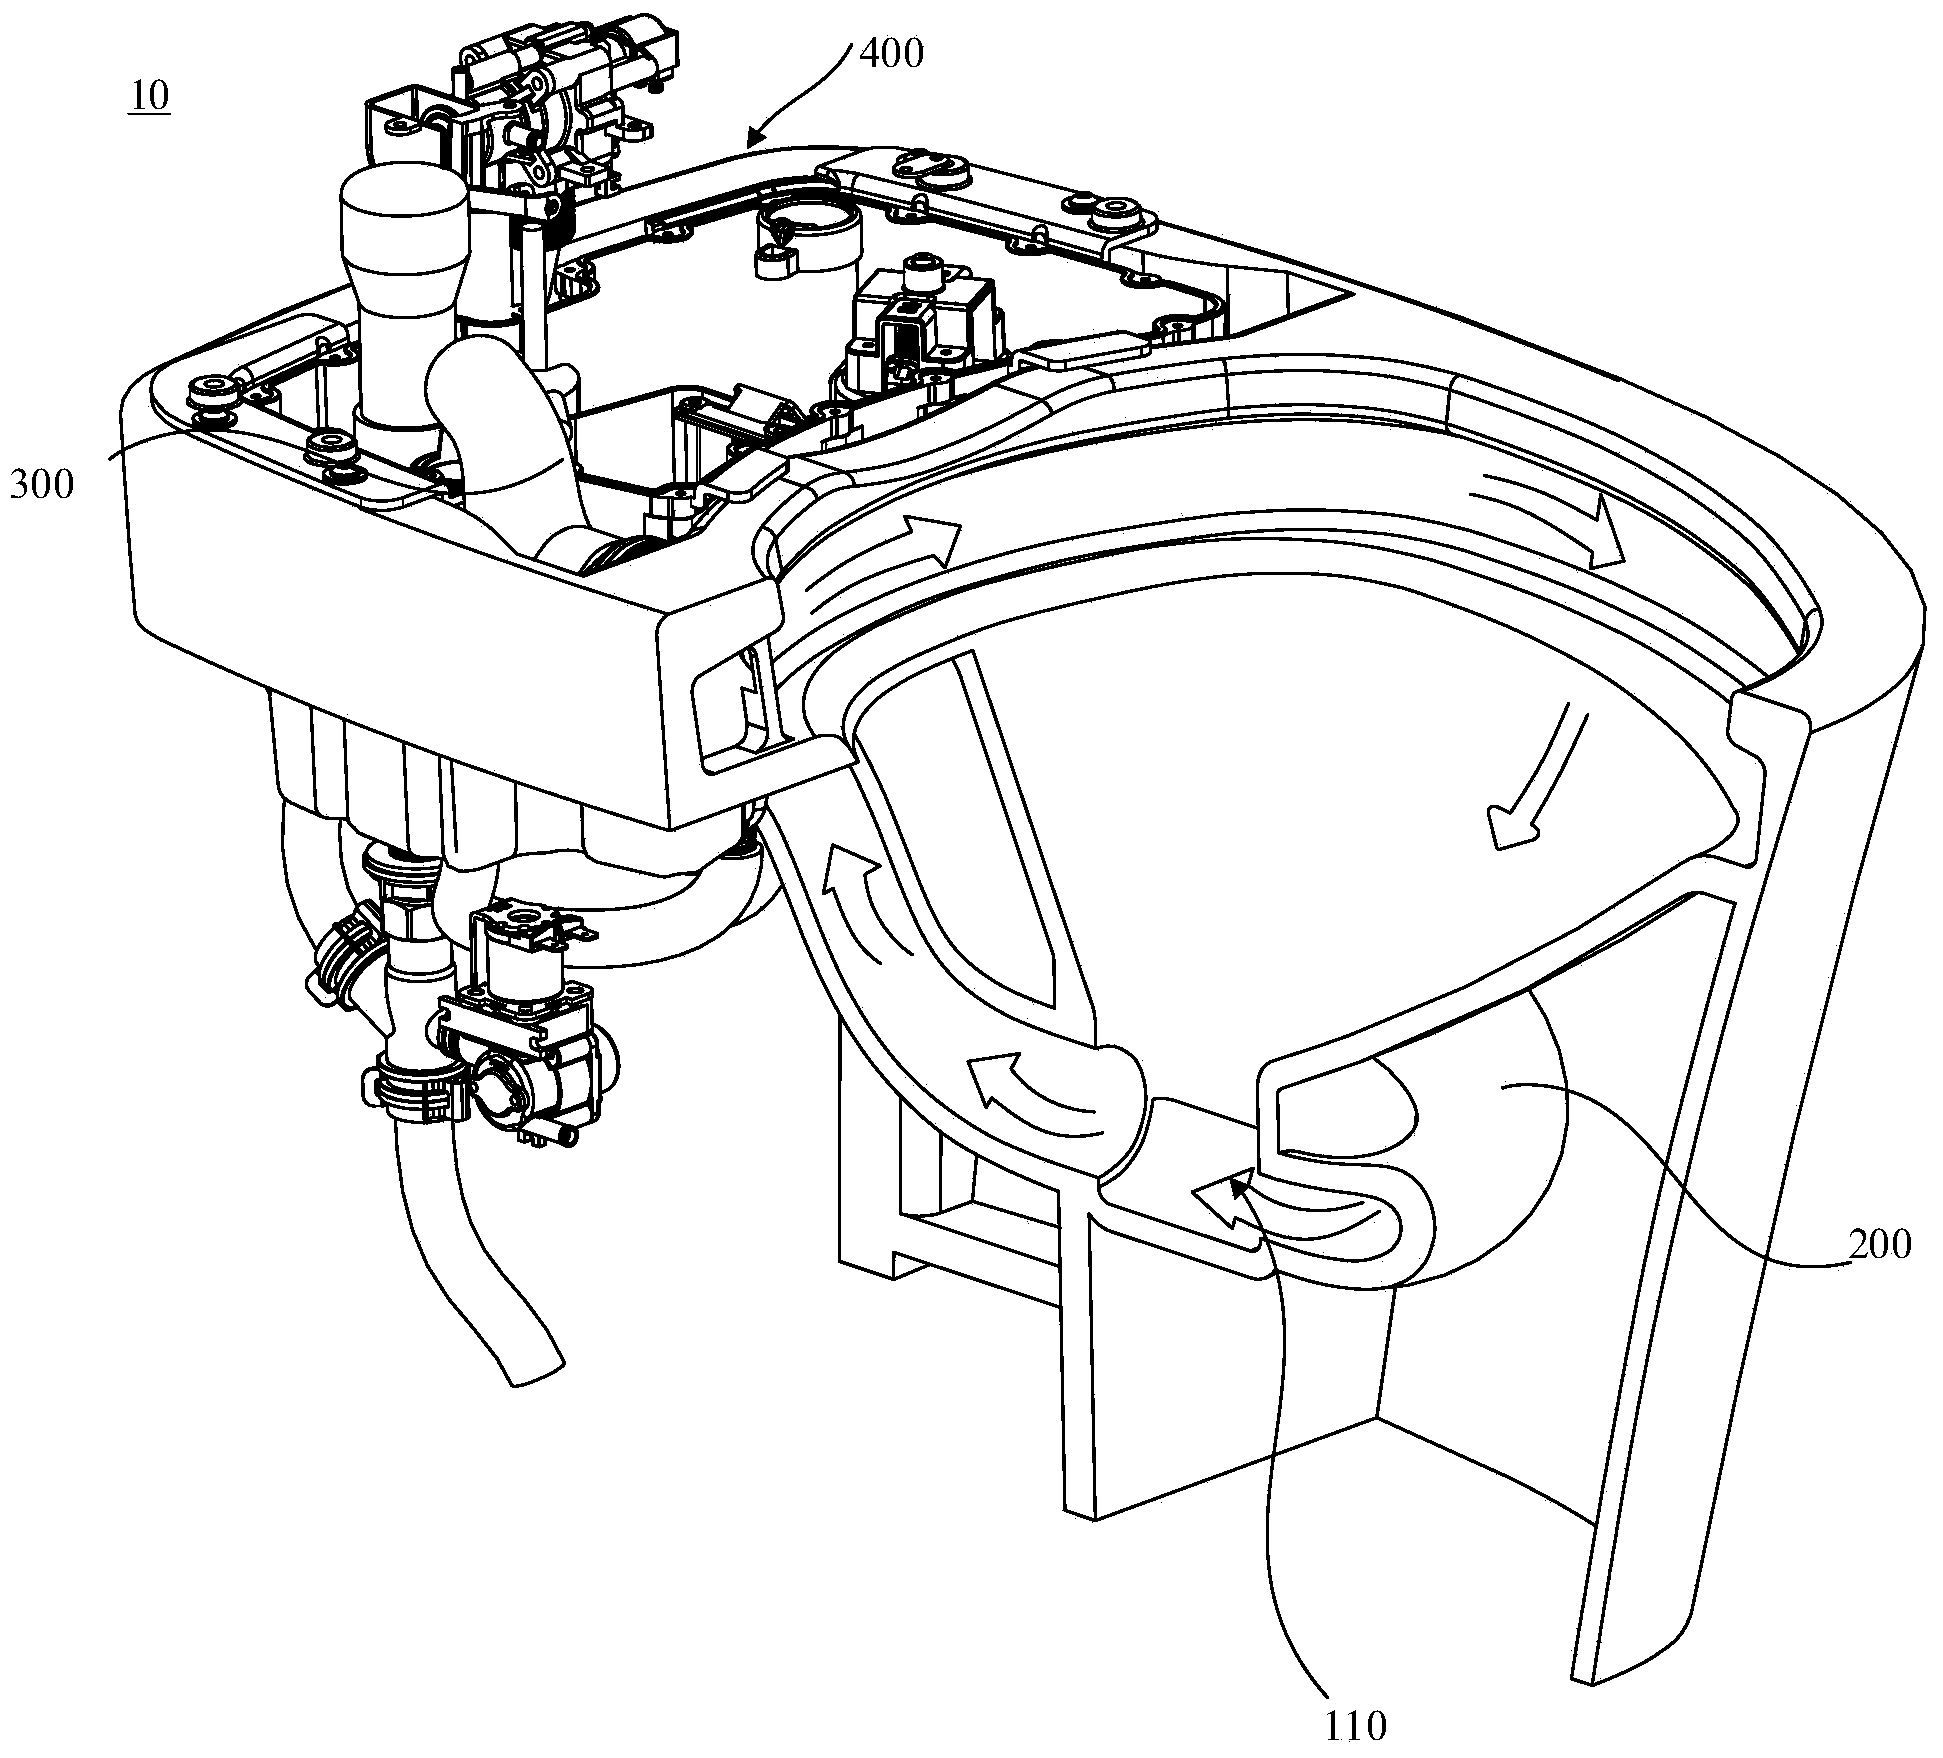 Toilet bowl and flushing system thereof